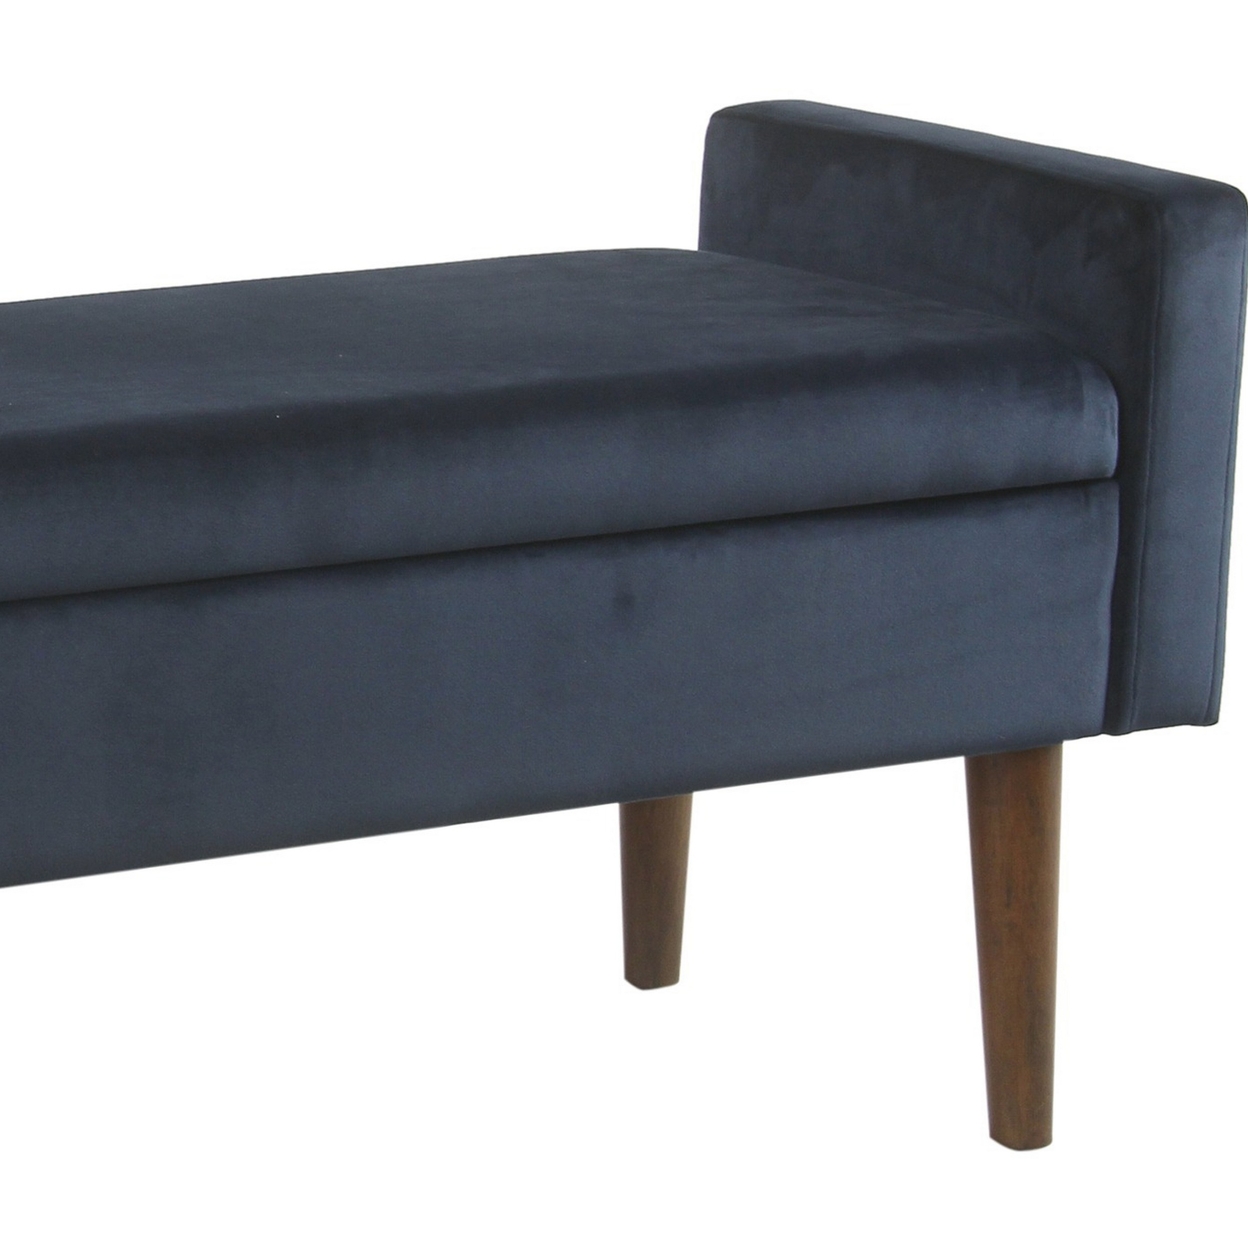 Velvet Upholstered Wooden Bench With Lift Top Storage And Tapered Feet, Navy Blue- Saltoro Sherpi